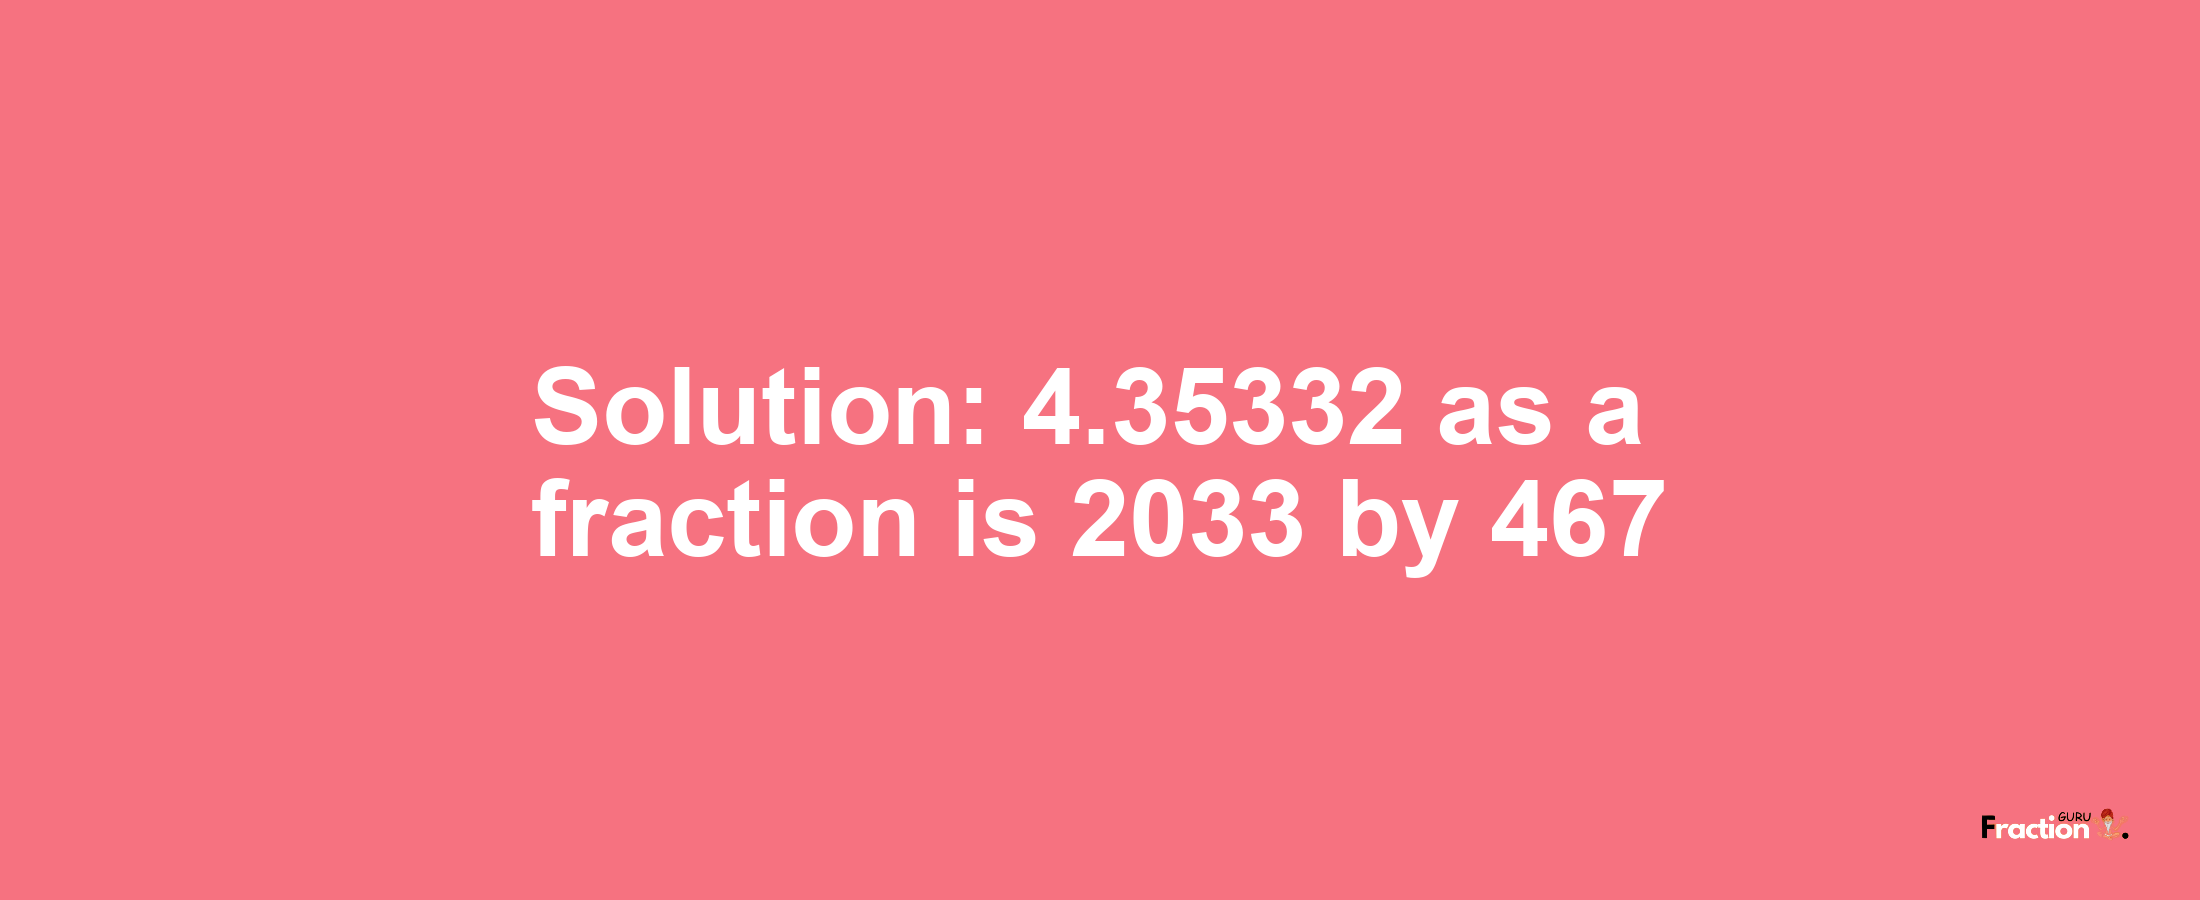 Solution:4.35332 as a fraction is 2033/467